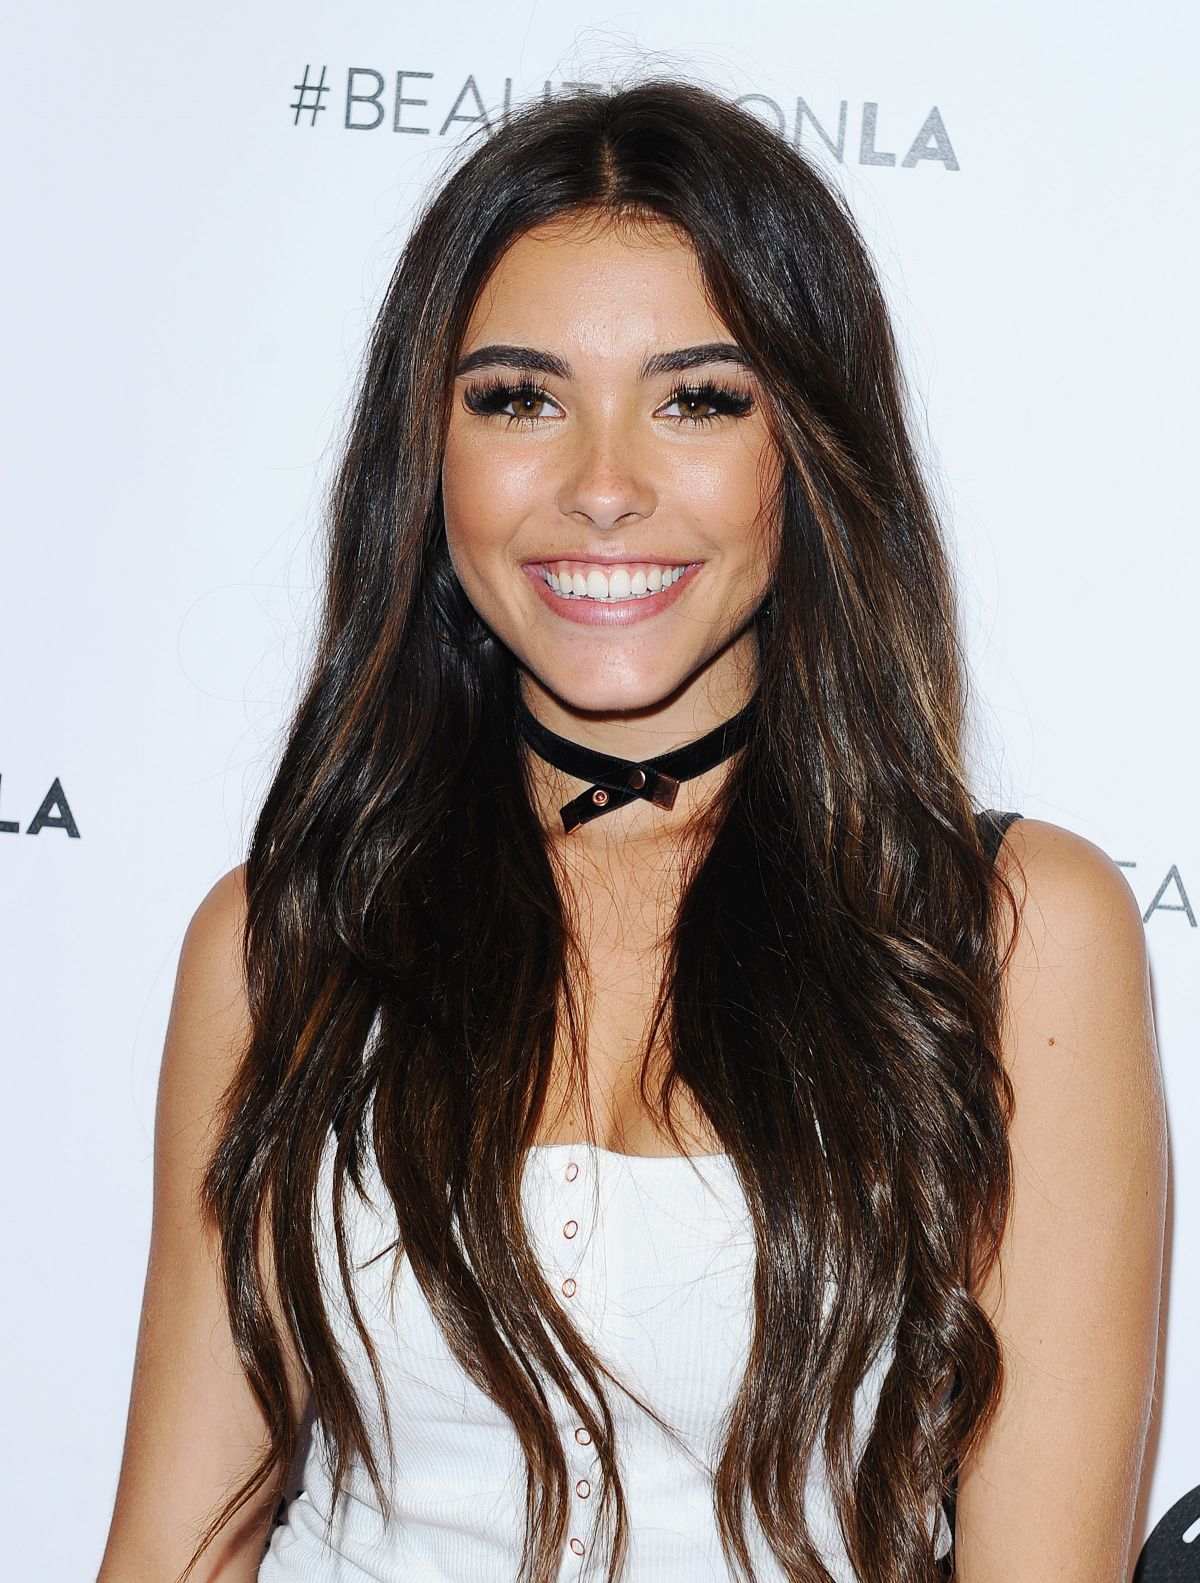 MADISON BEER at 2016 Beautycon Festival in Los Angeles 07/09/2016 ...